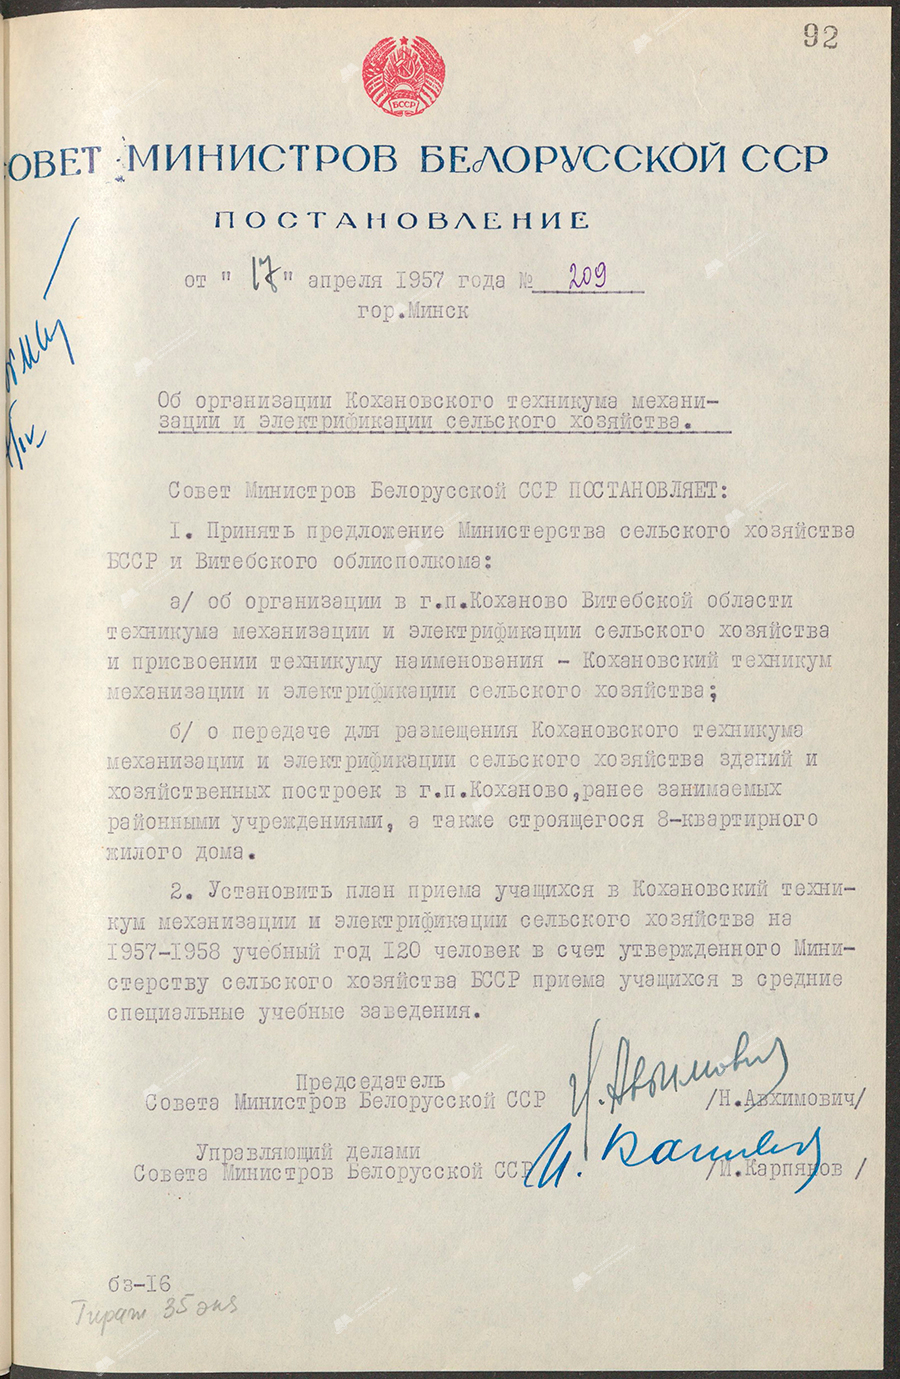 Resolution No. 209 of the Council of Ministers of the BSSR «On the organization of the Kokhanovsky College of Mechanization and Electrification of Agriculture»-стр. 0